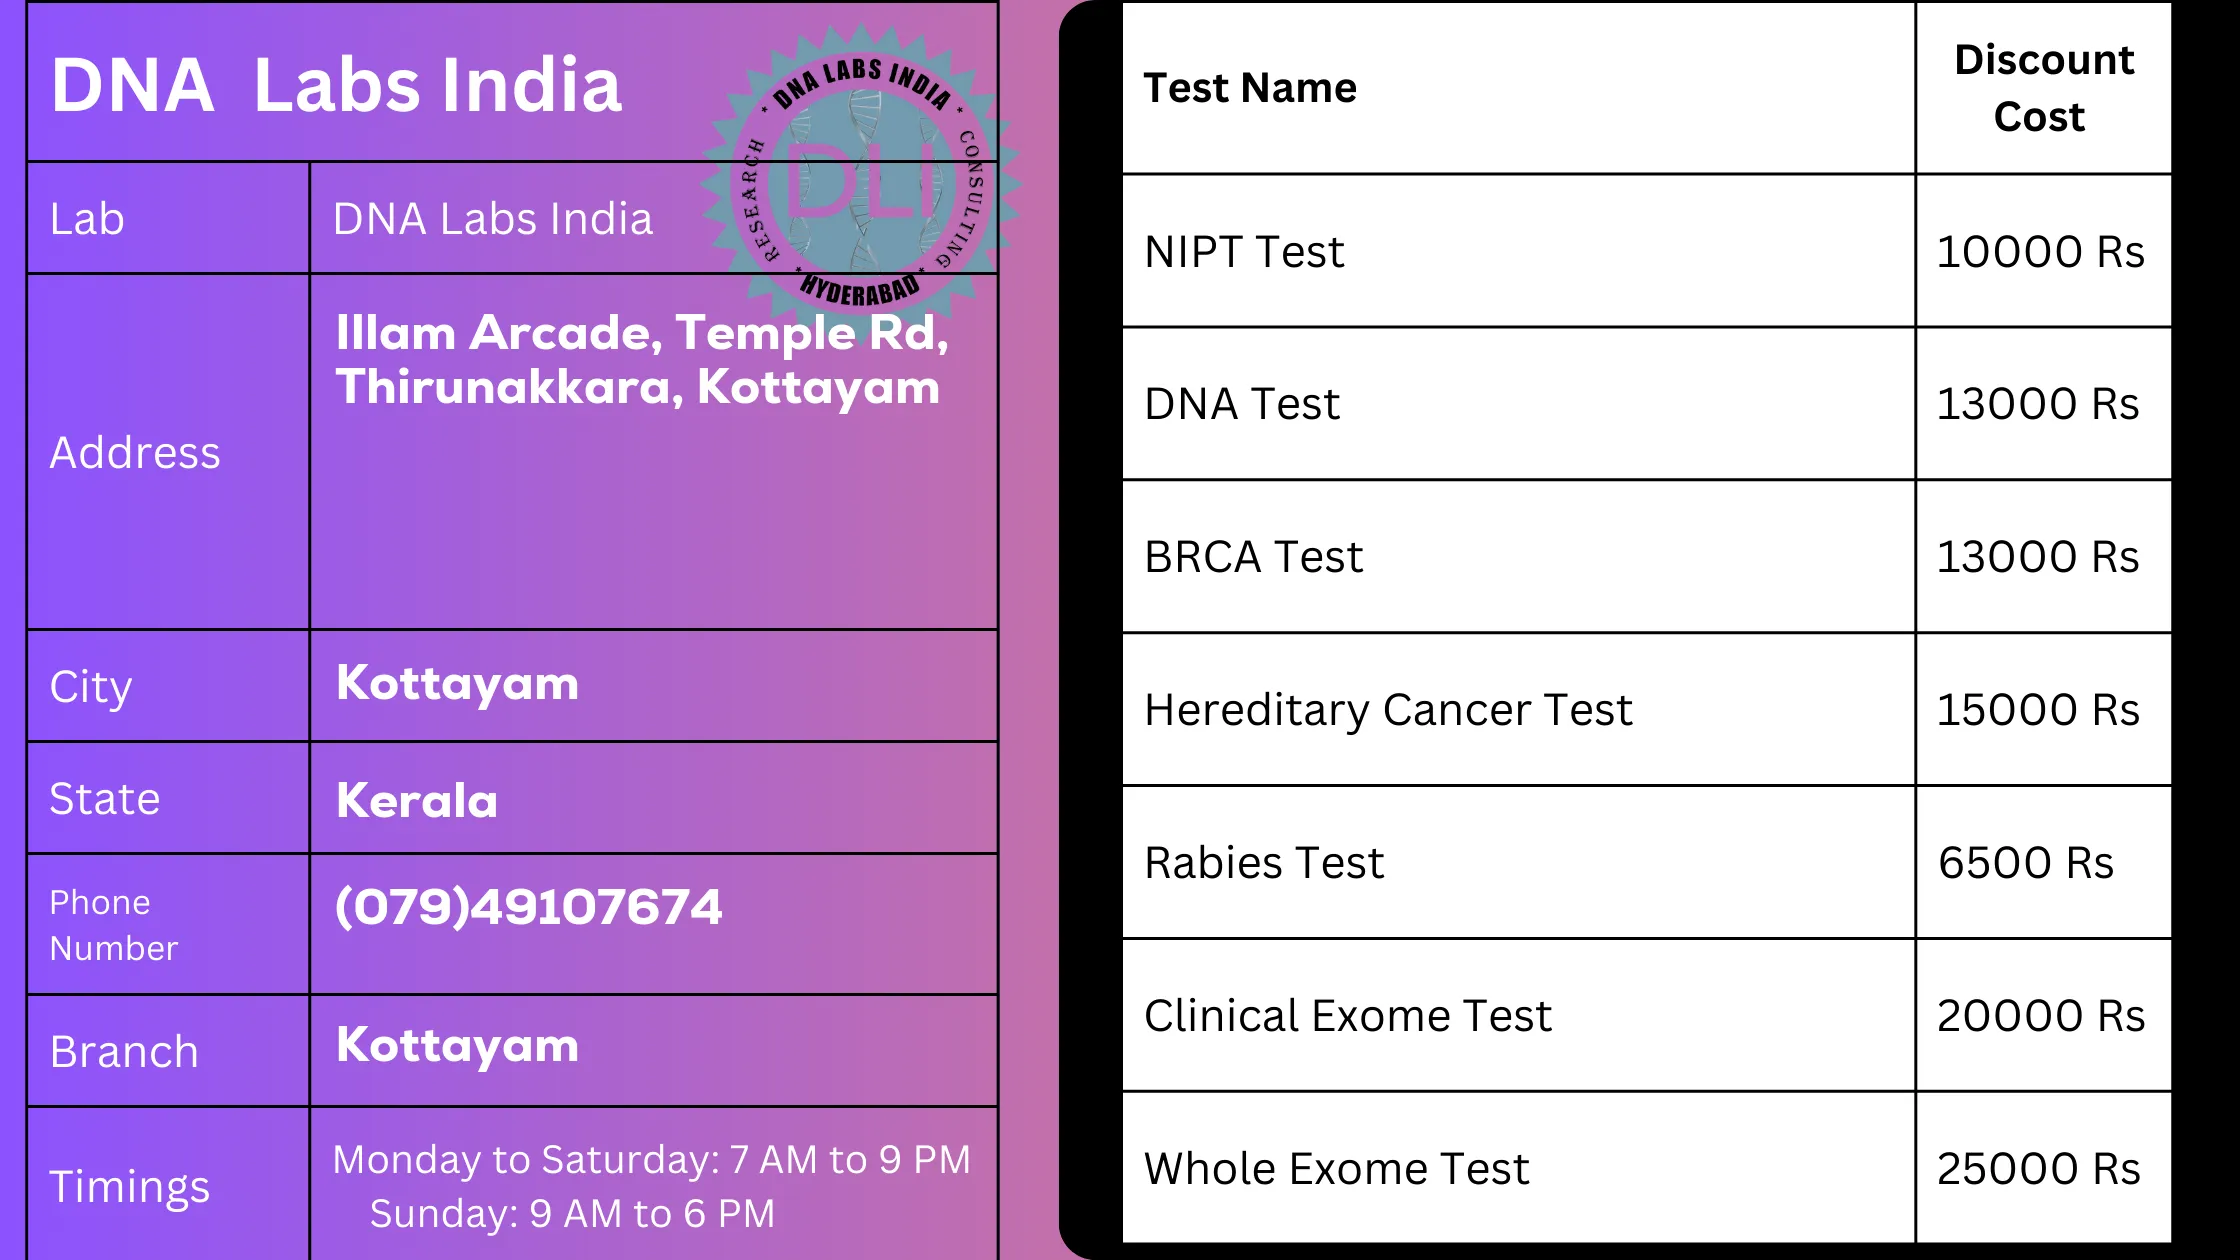 DNA Labs India in Kottayam: Your Trusted Partner for Genetic Testing